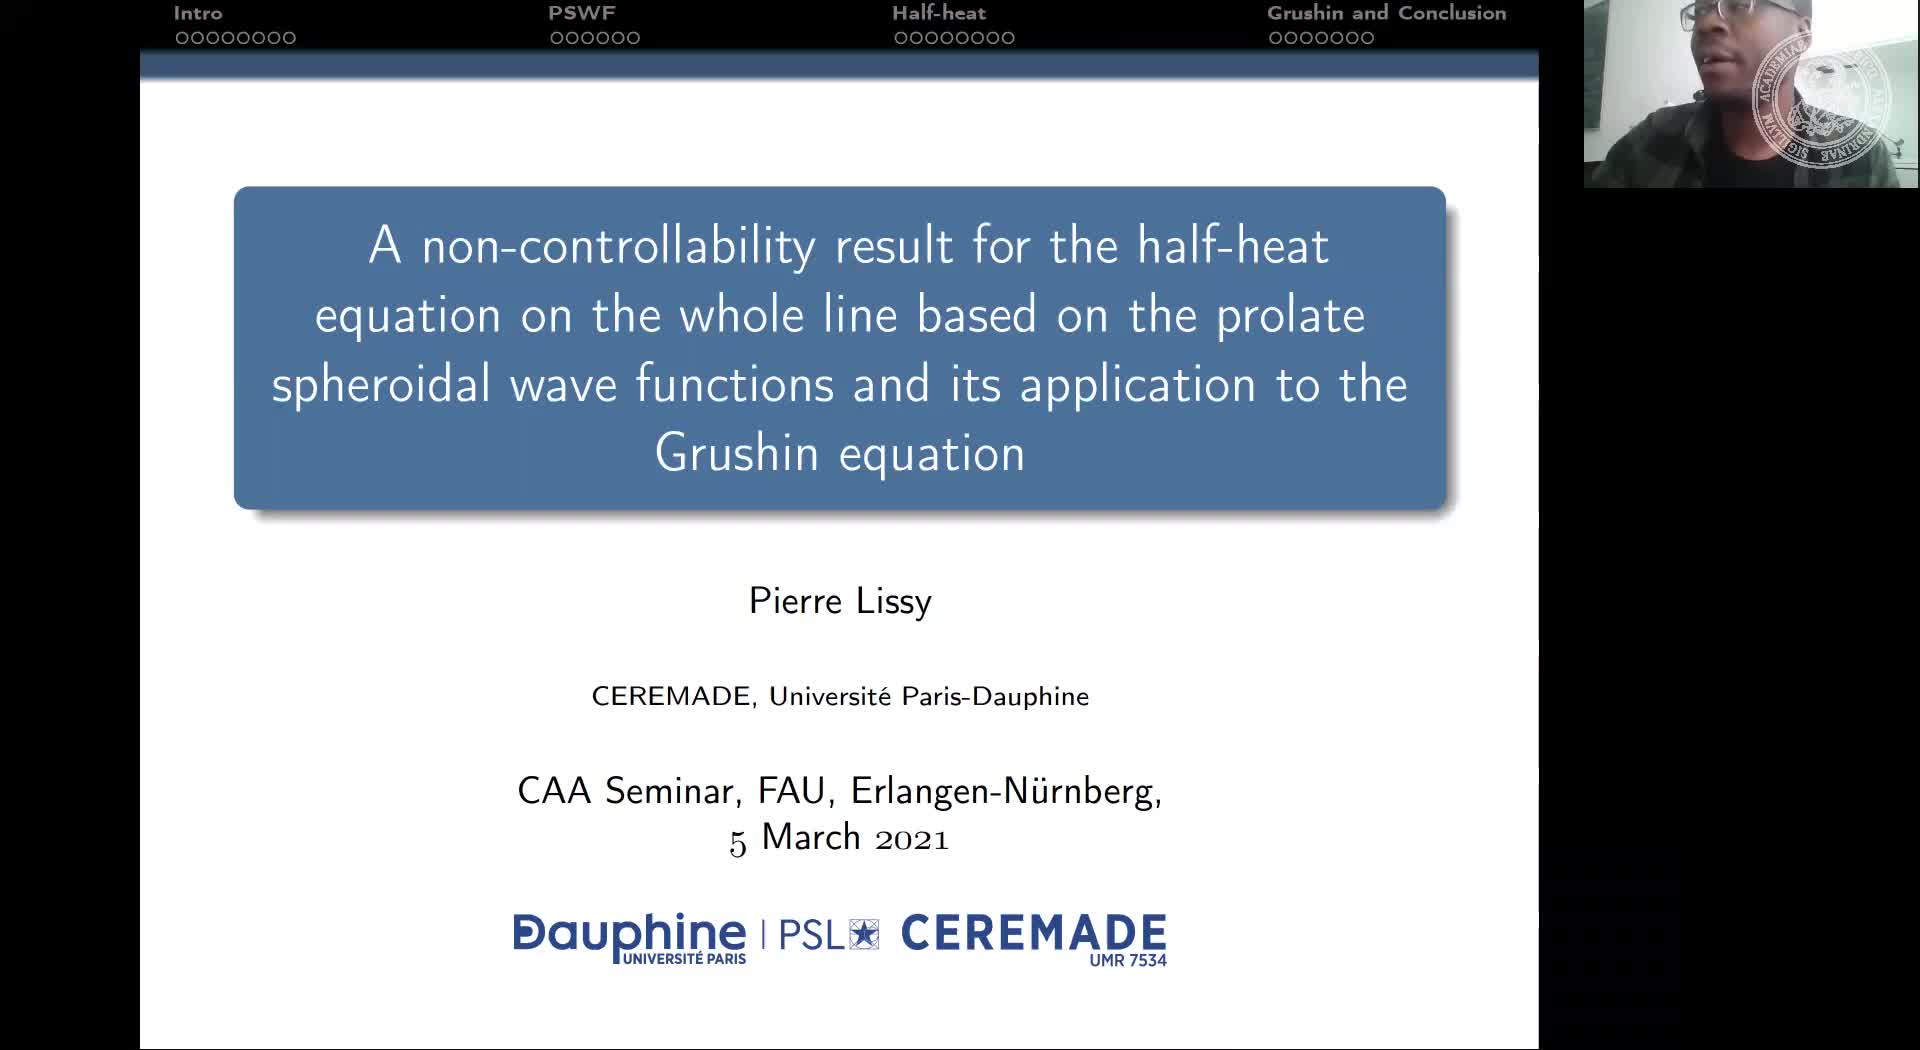 A non-controllability result for the half-heat equation on the whole line based on the prolate spheroidal wave functions and its application to the Grushin equation (P. Lissy, Université Paris-Dauphine, France) preview image